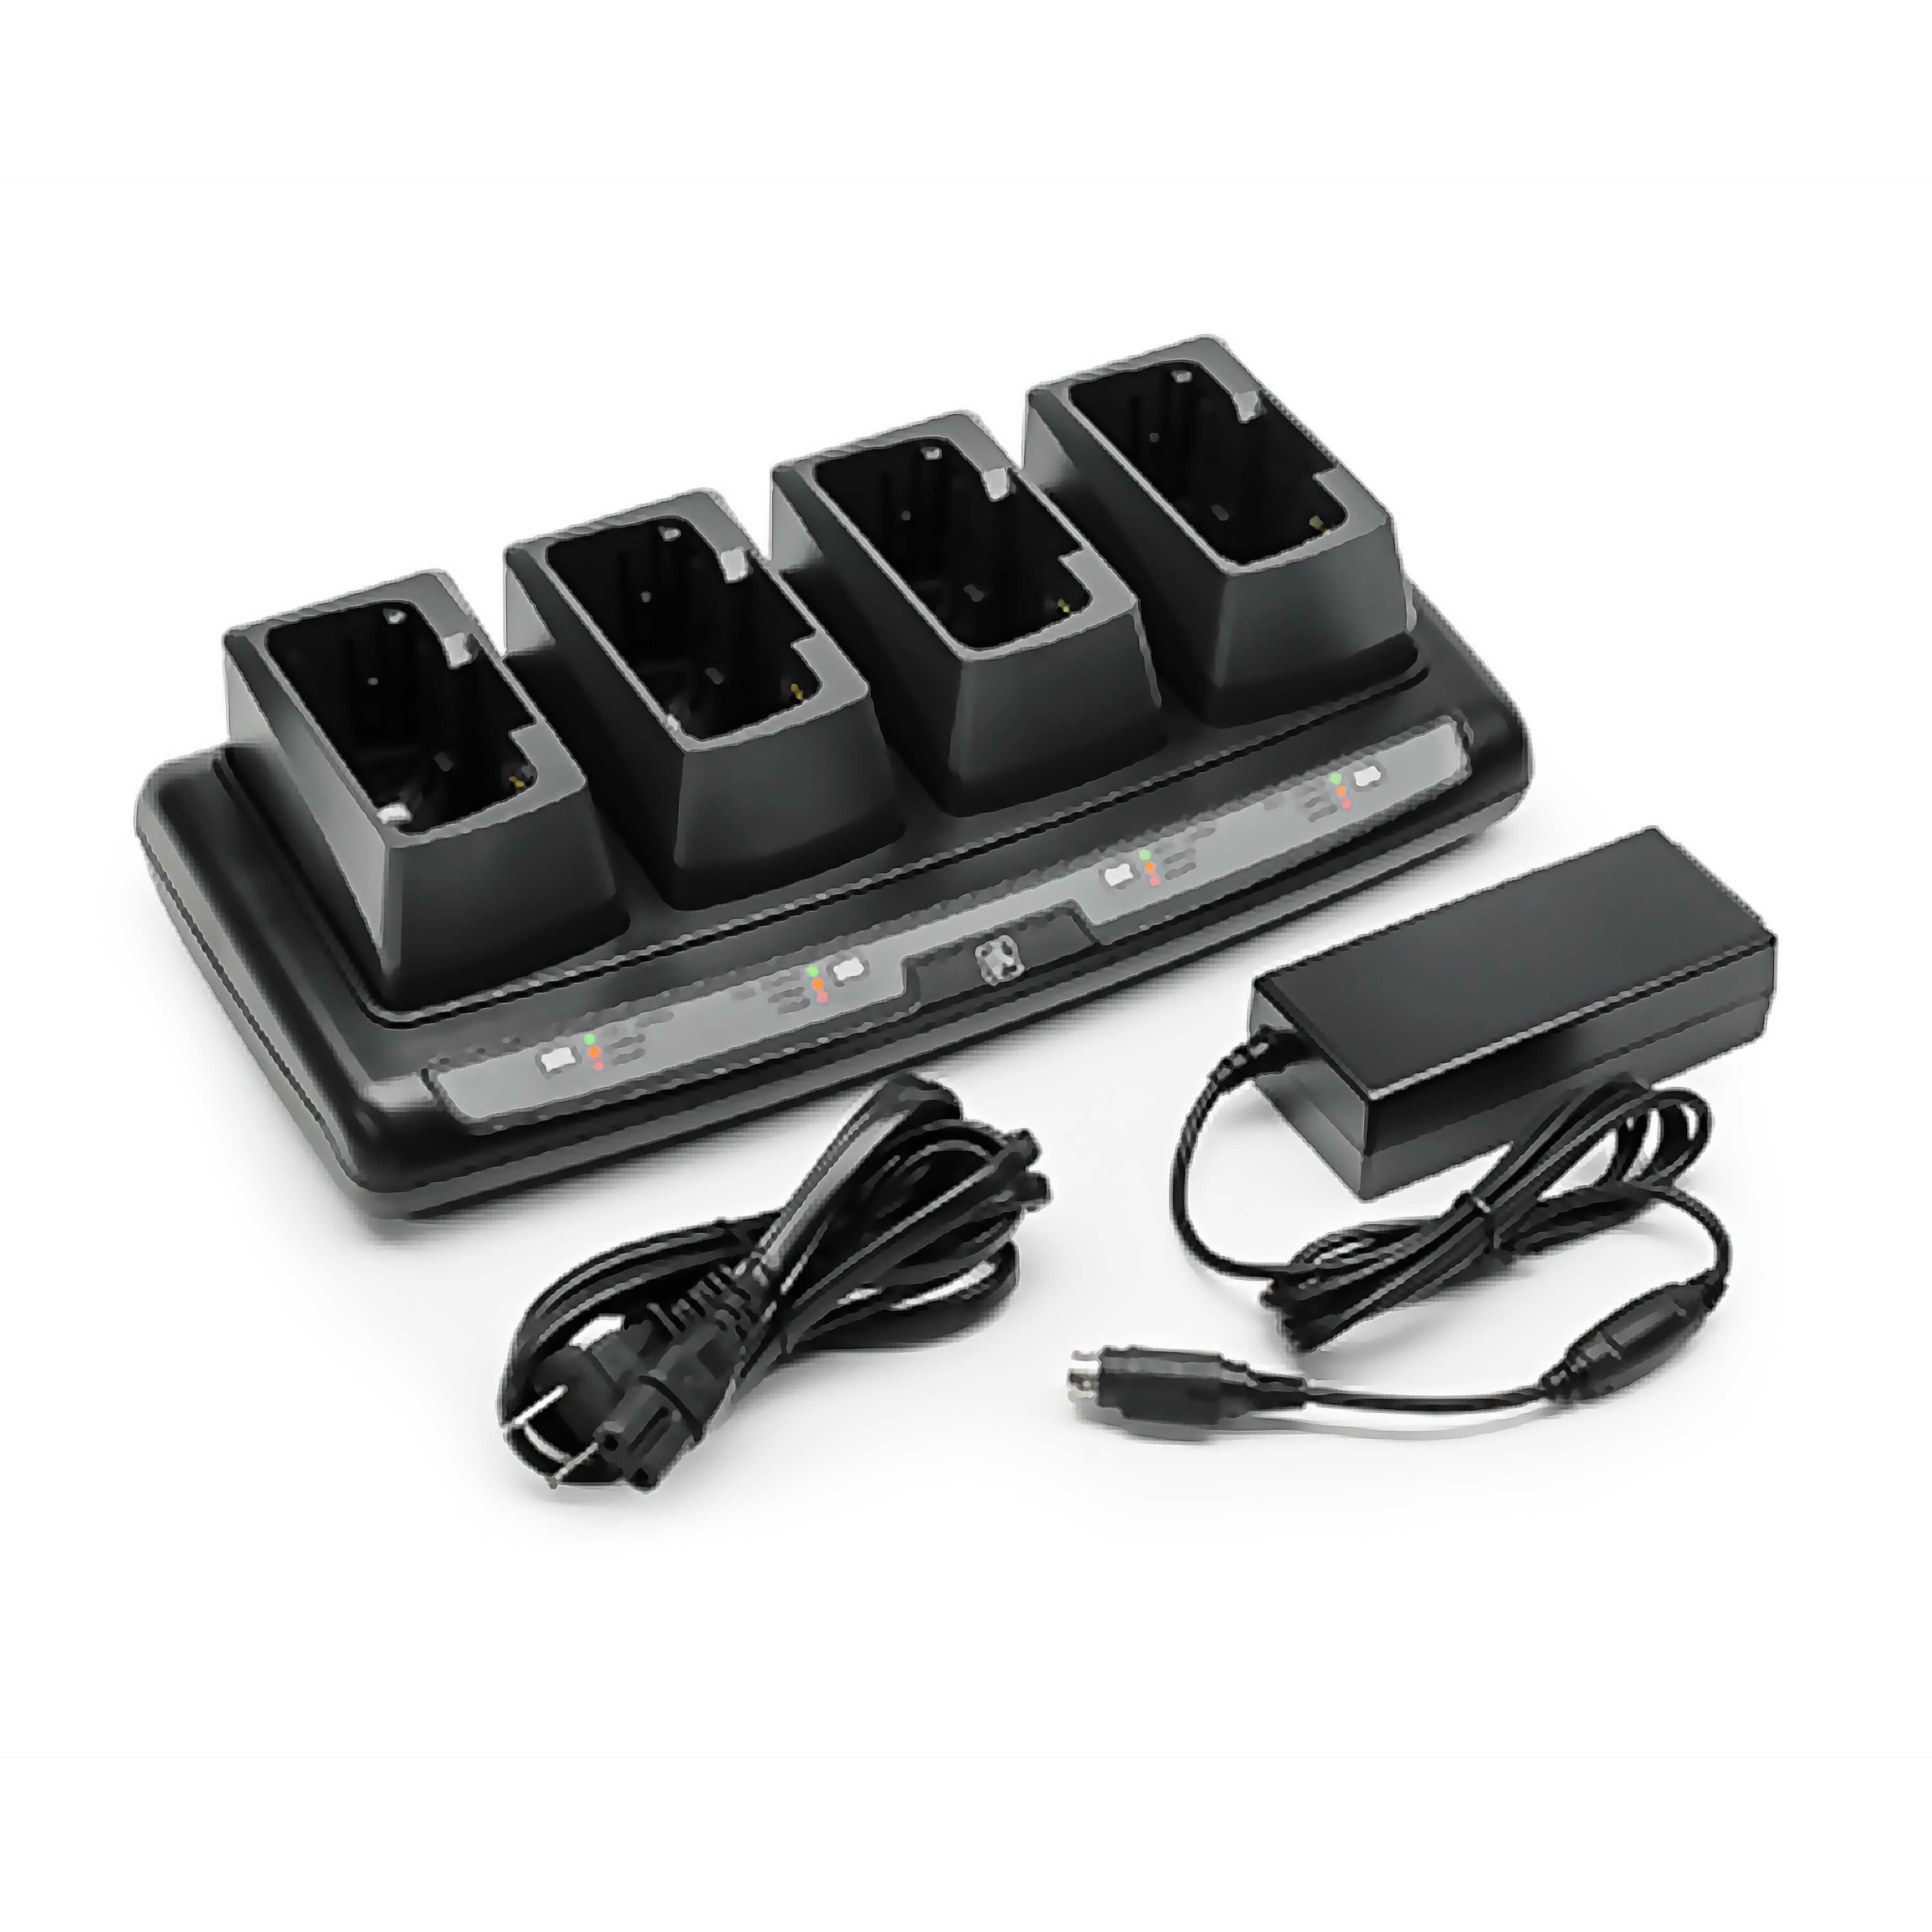 Printer Chargers and Power Adapters, Zebra